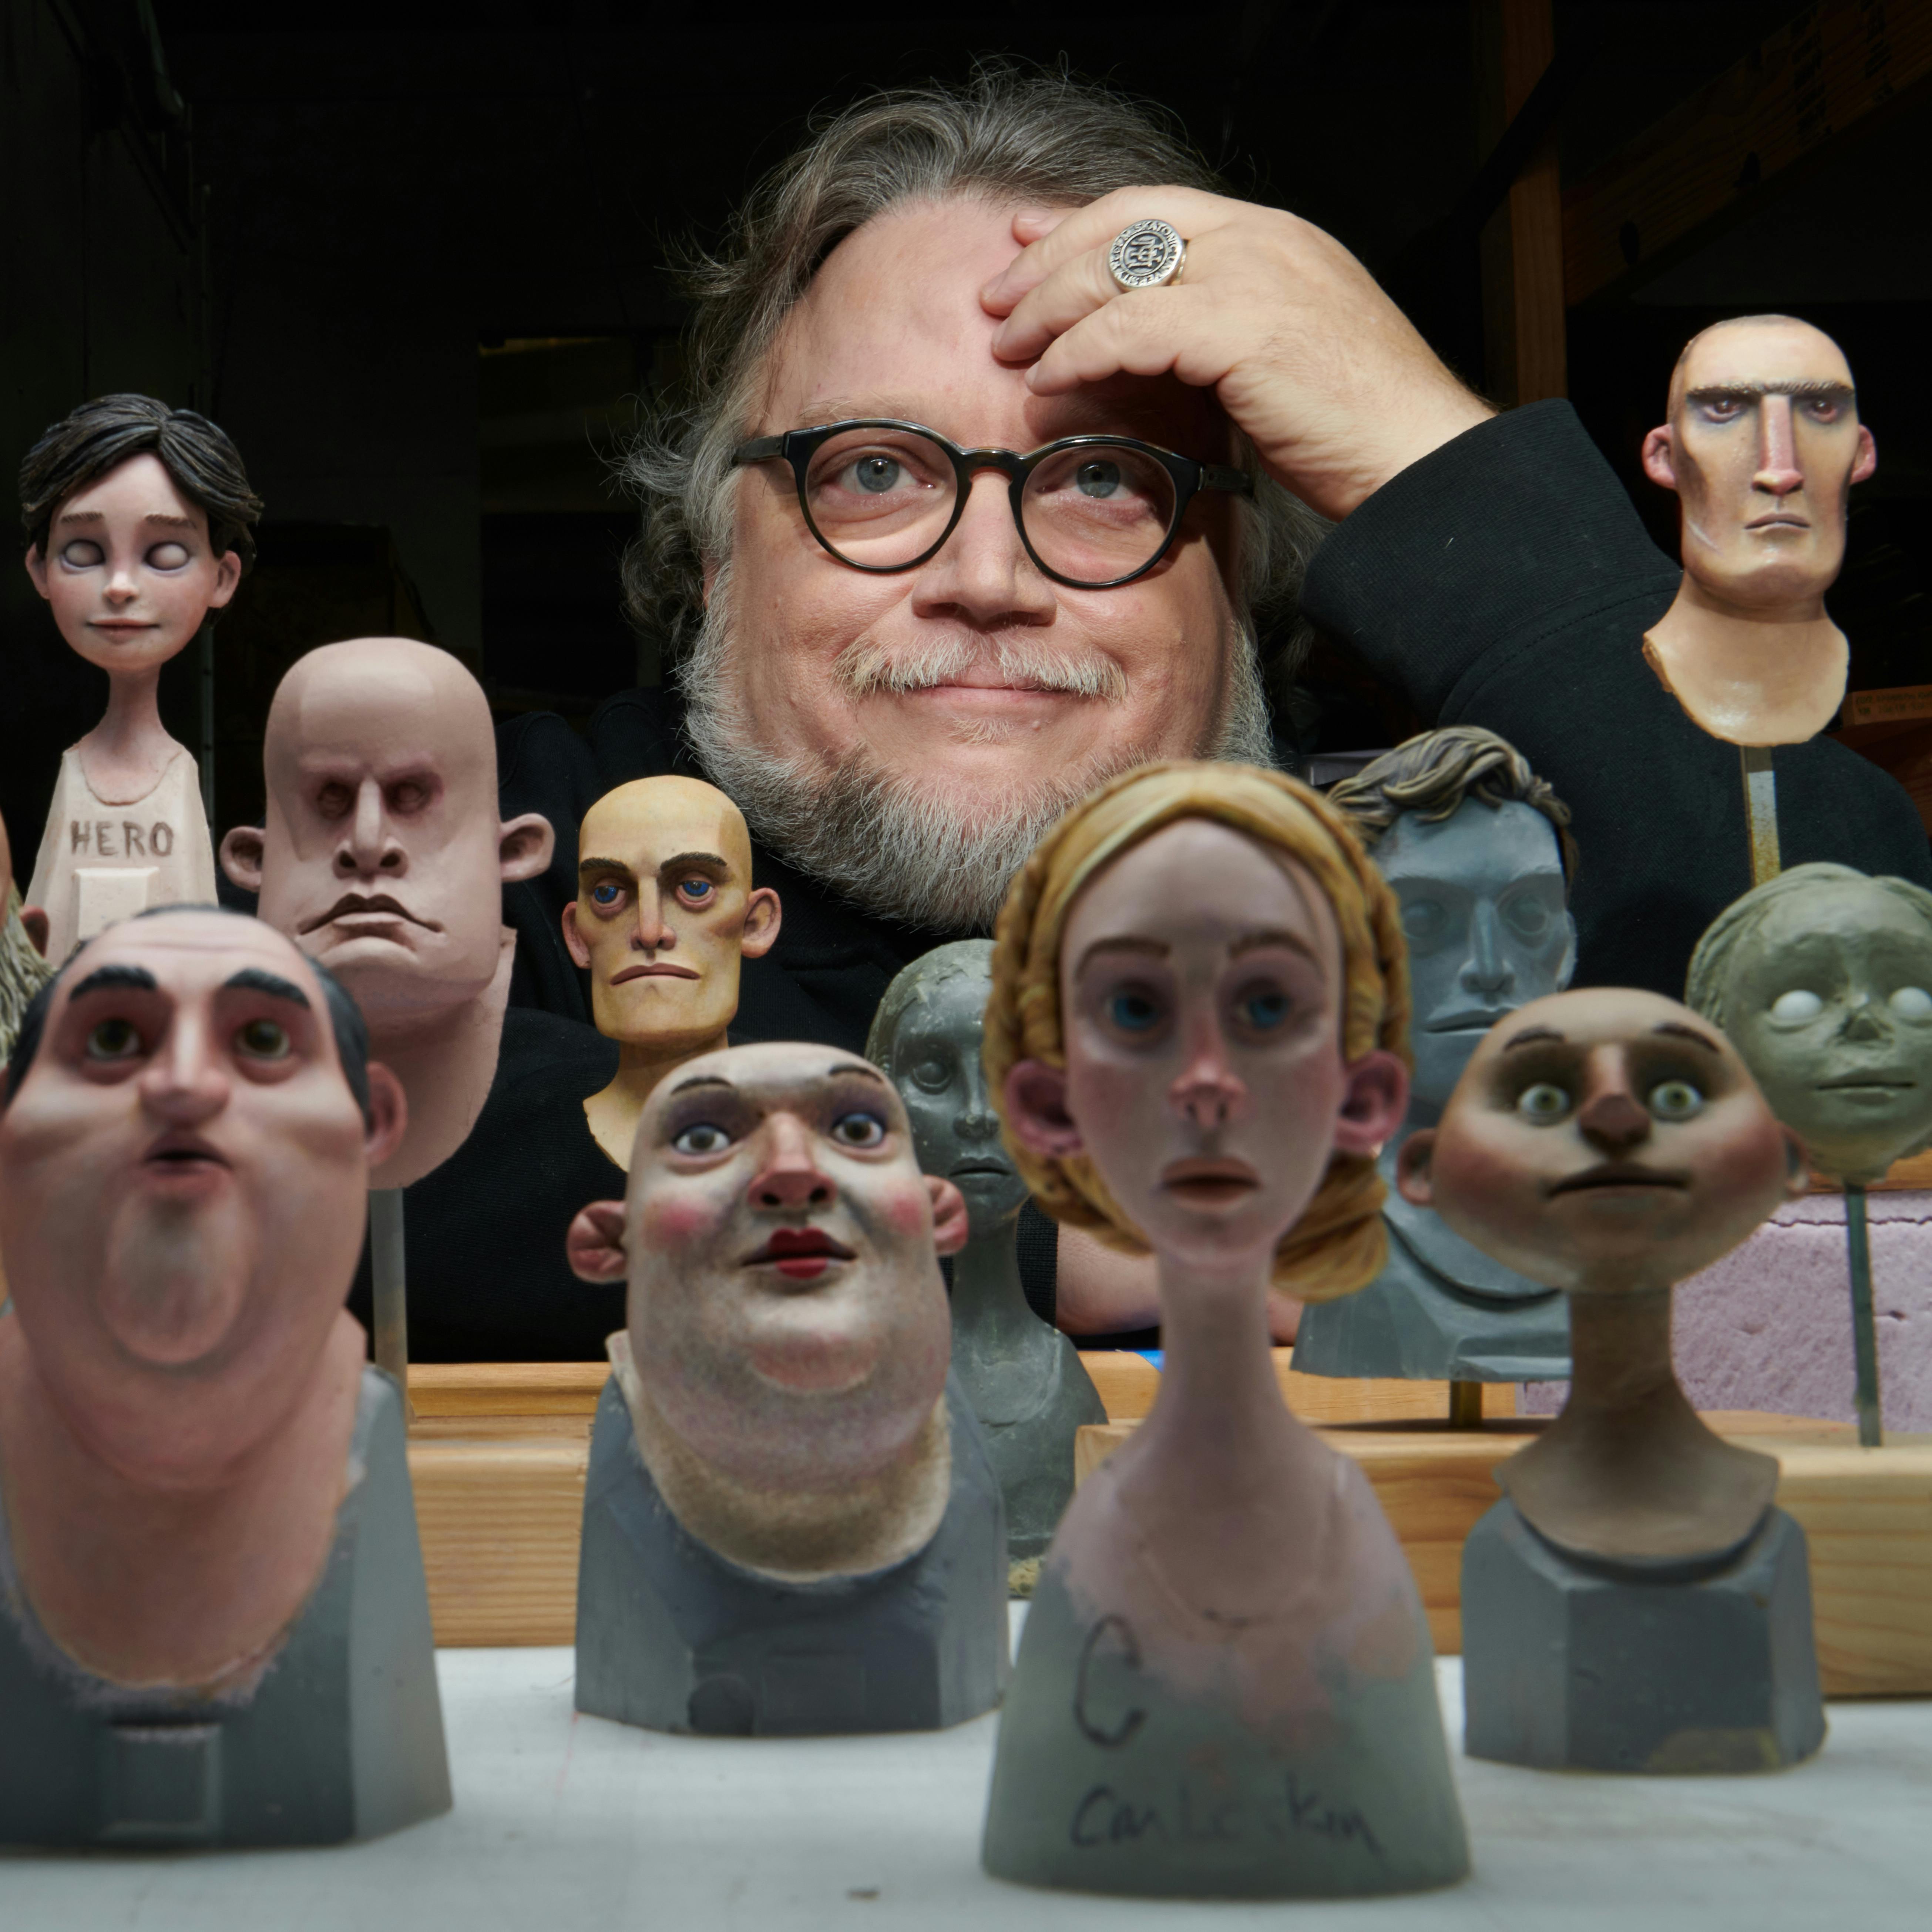 Guillermo del Toro looks at the camera through a crowd of puppets.